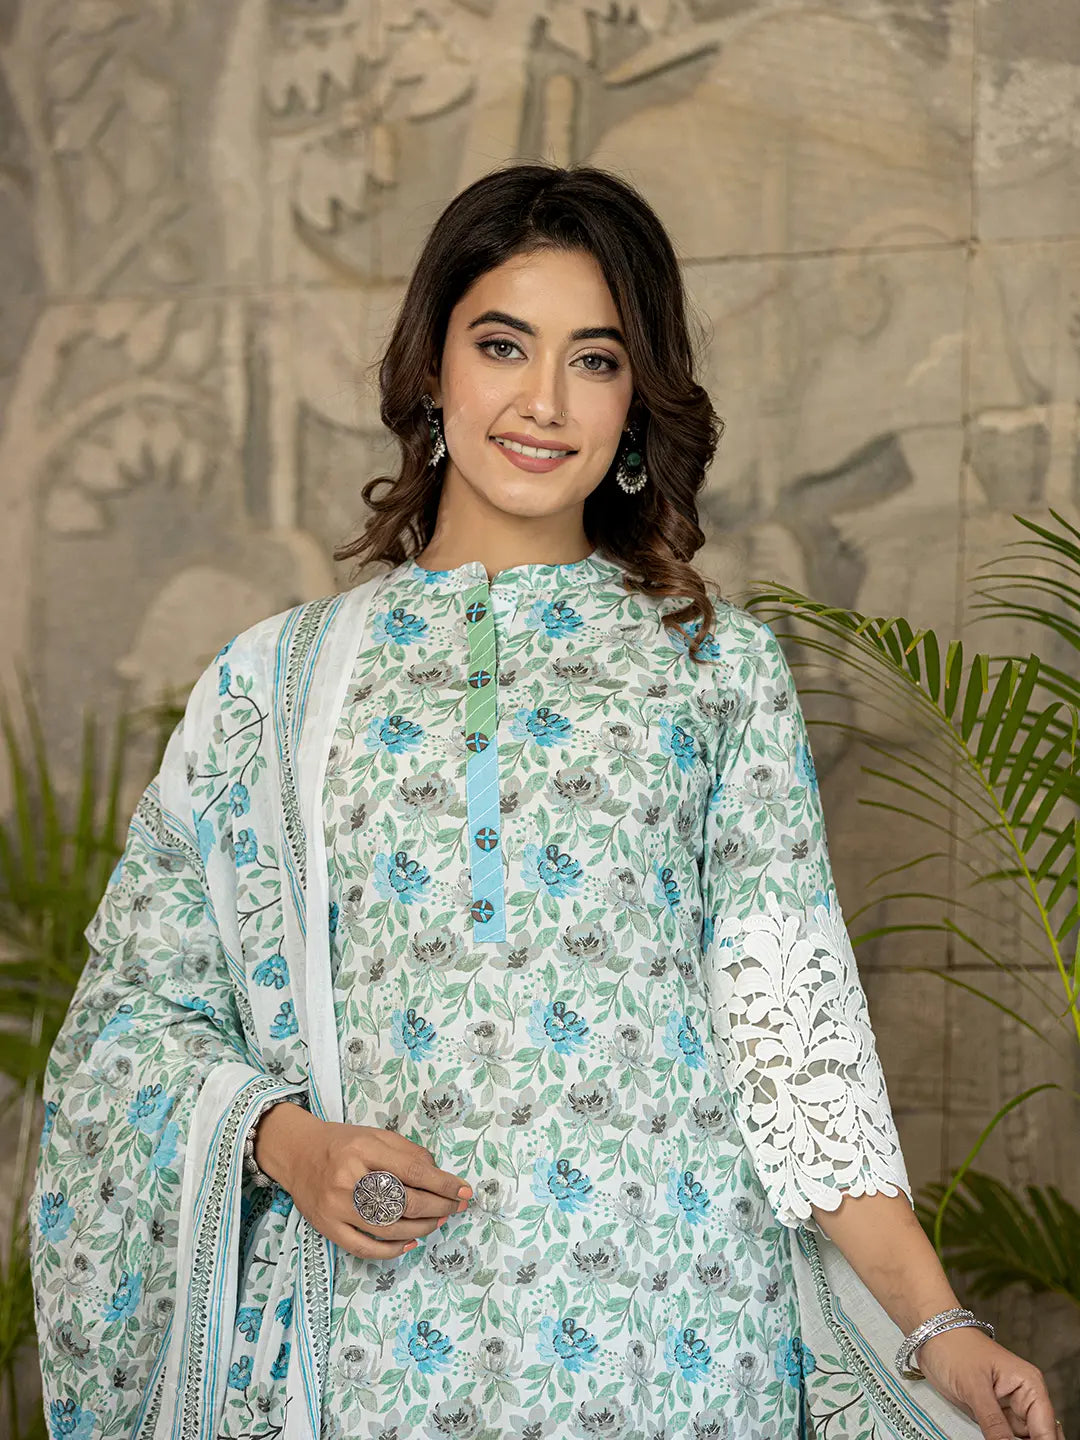 White And Sky Blue Floral Print Pakistani Style Kurta Trouser And Dupatta Set With Lace Work-Yufta Store-6886SKDSBM